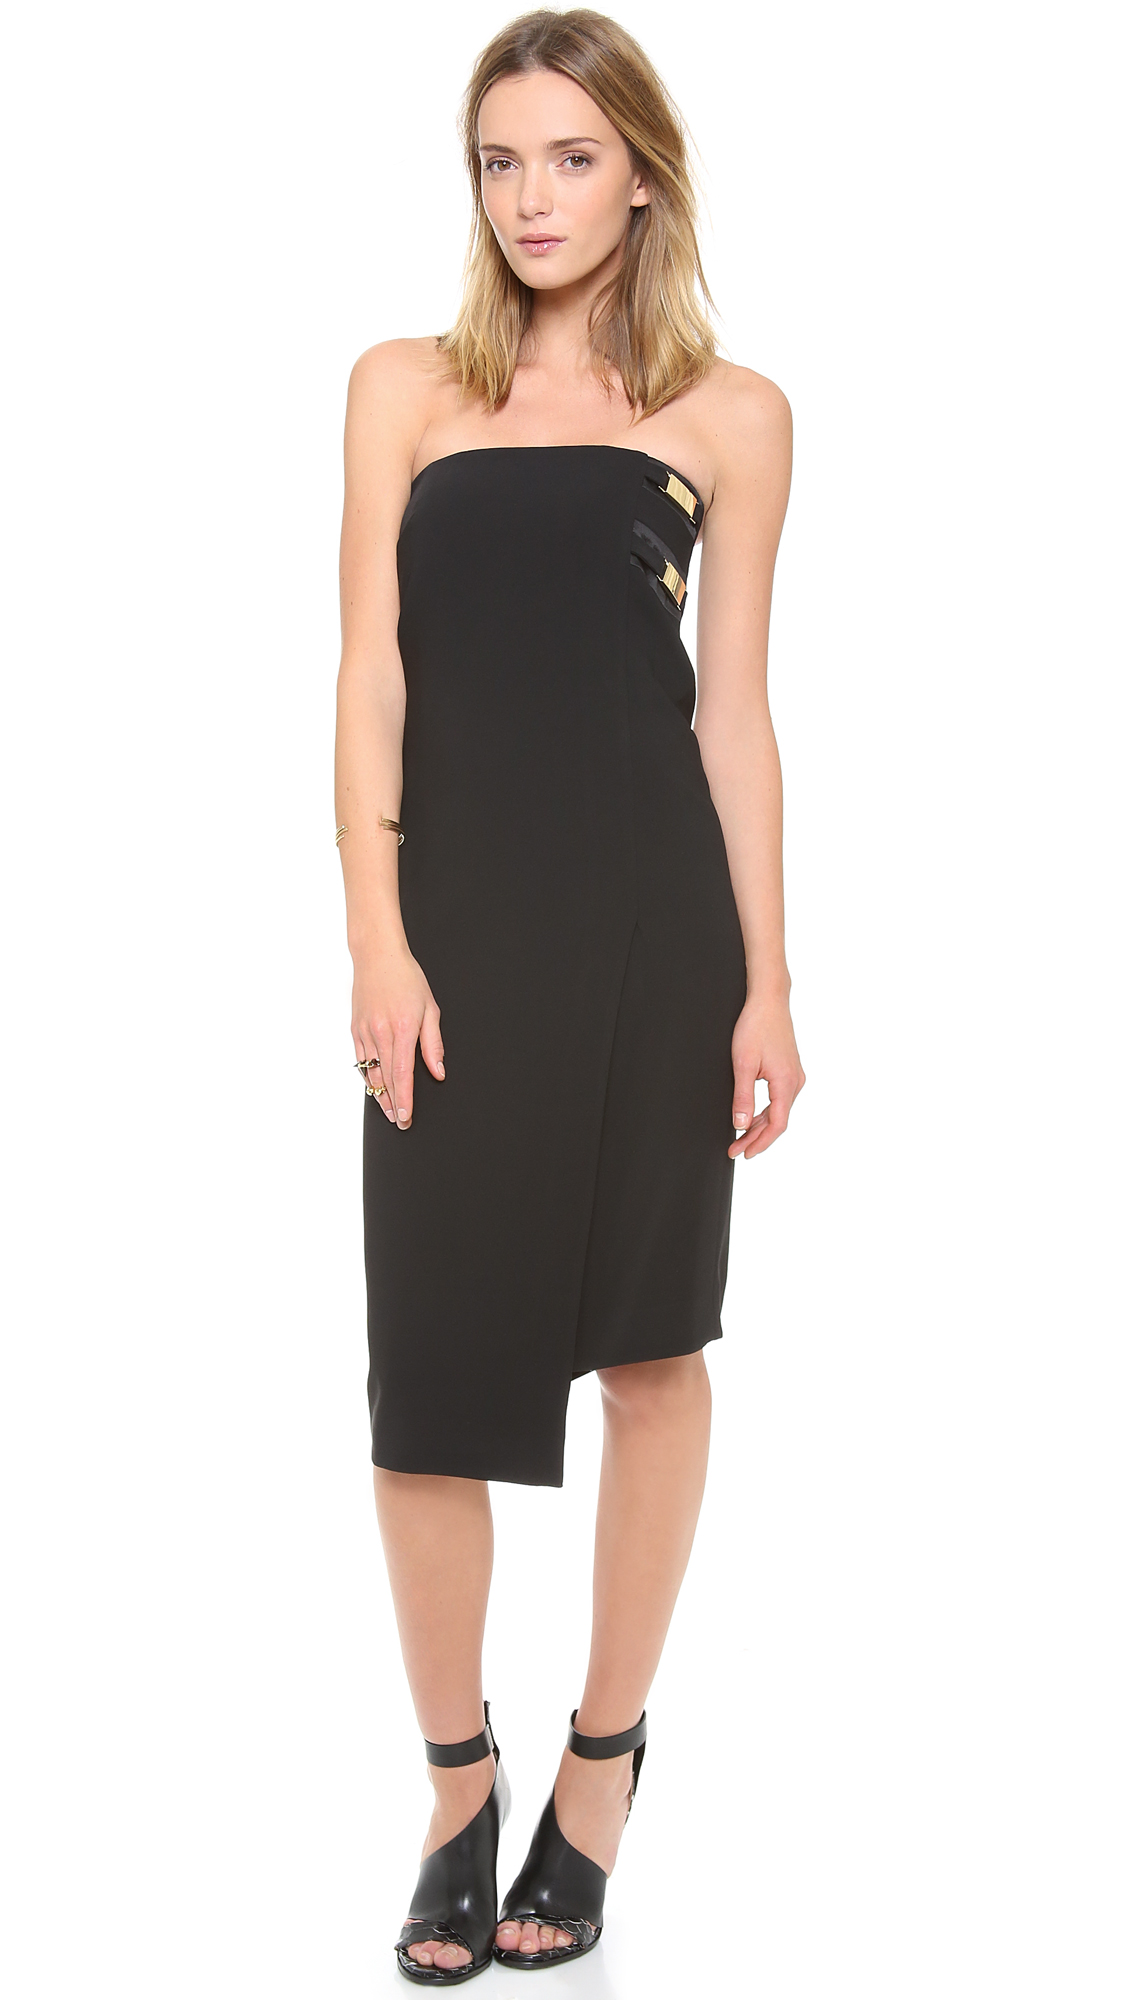 Lyst - Camilla & Marc Equivalence Strapless Buckle Dress in Black